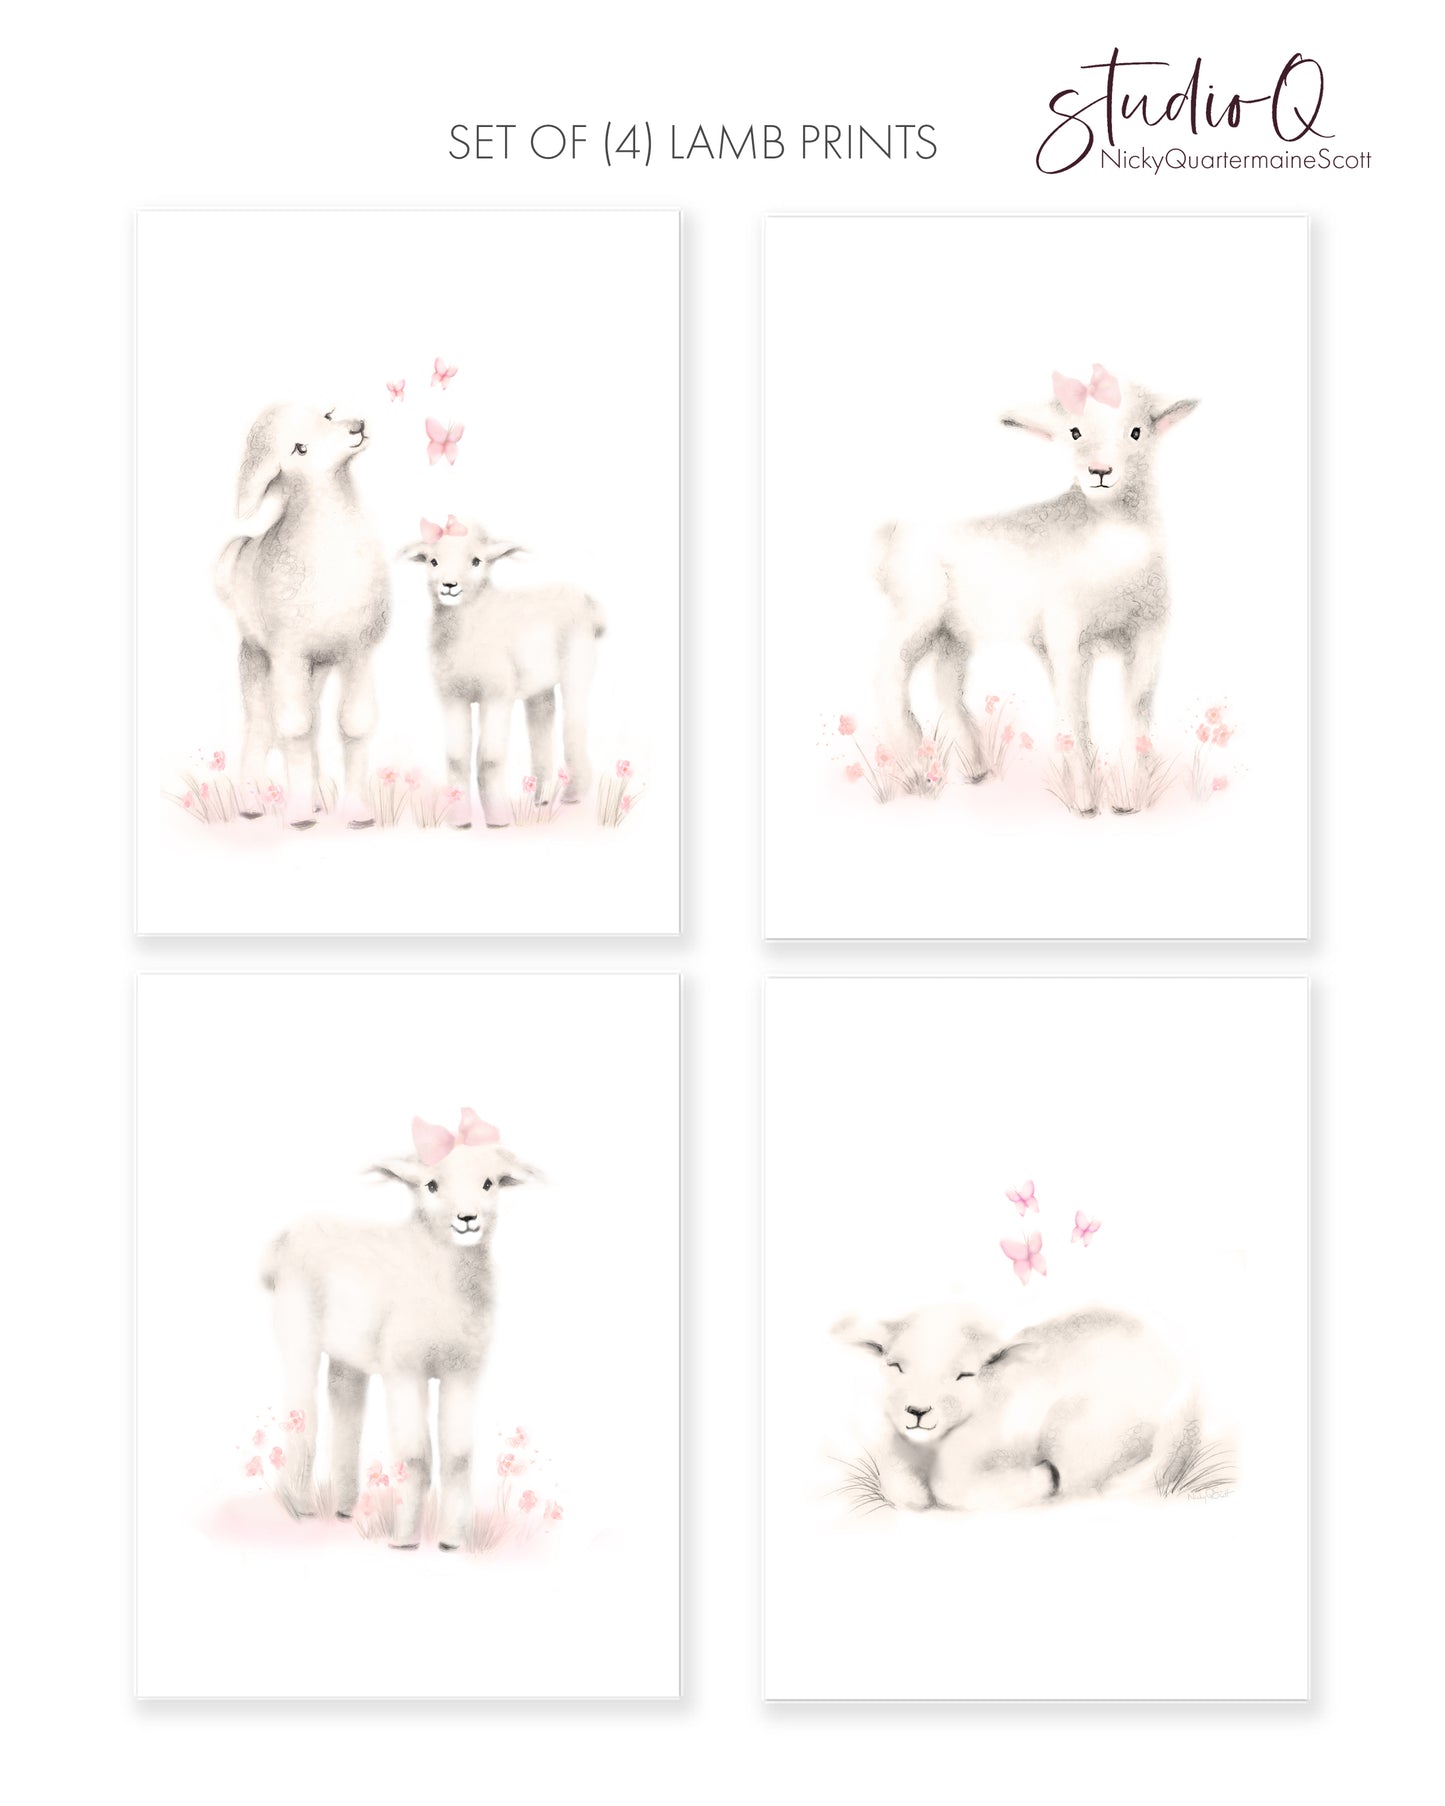 Set of 4 lamb prints from drawings in tones of sepia beige and blush pink. Lambs have pink flowers, bows and butterflies around them. The prints are on a white background and are framed in light wood frames. The set hangs against a plain light pink background - Studio Q - Art by Nicky Quartermaine Scott